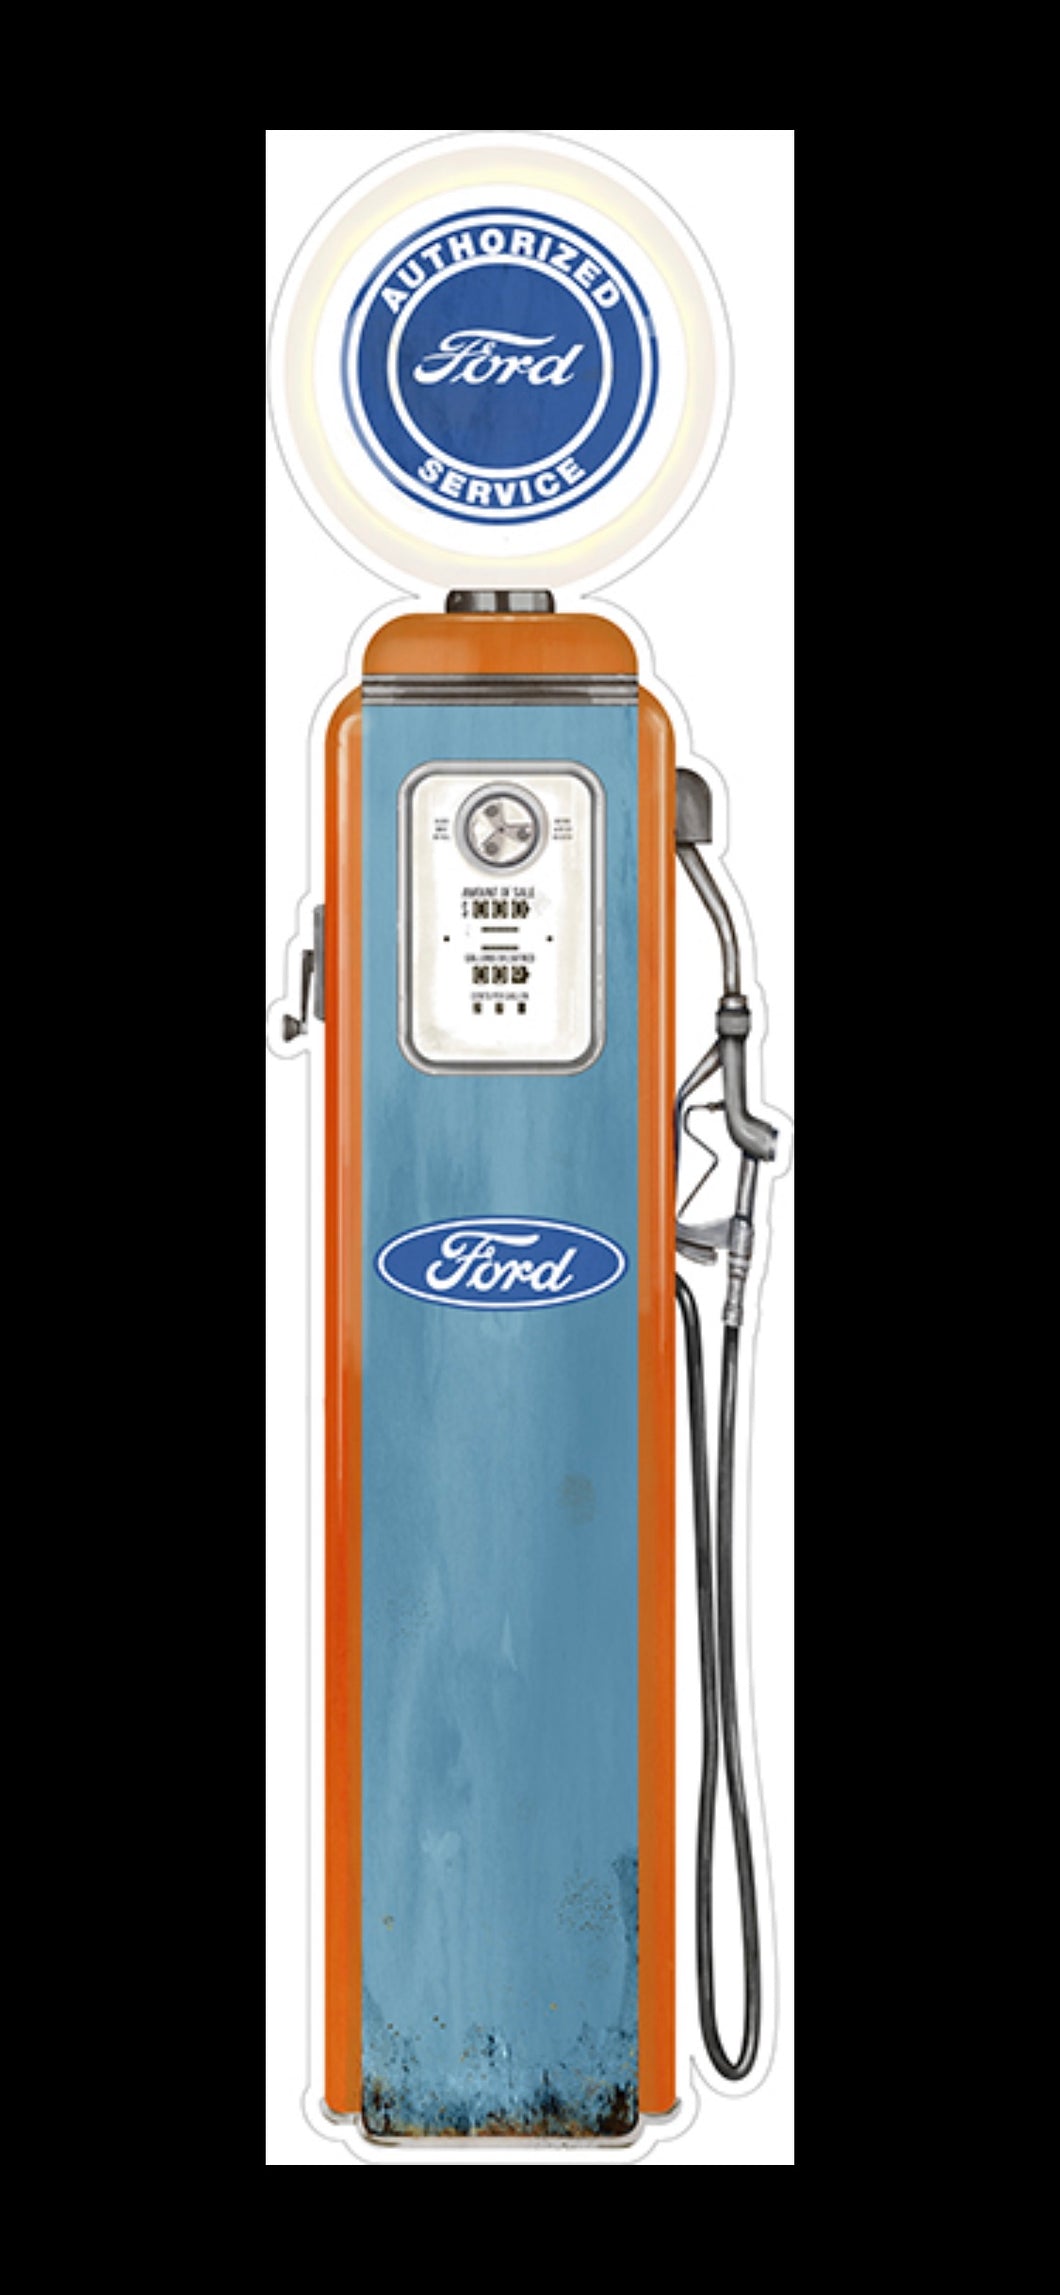 Authorized Ford Service Gas Pump Wooden Sign